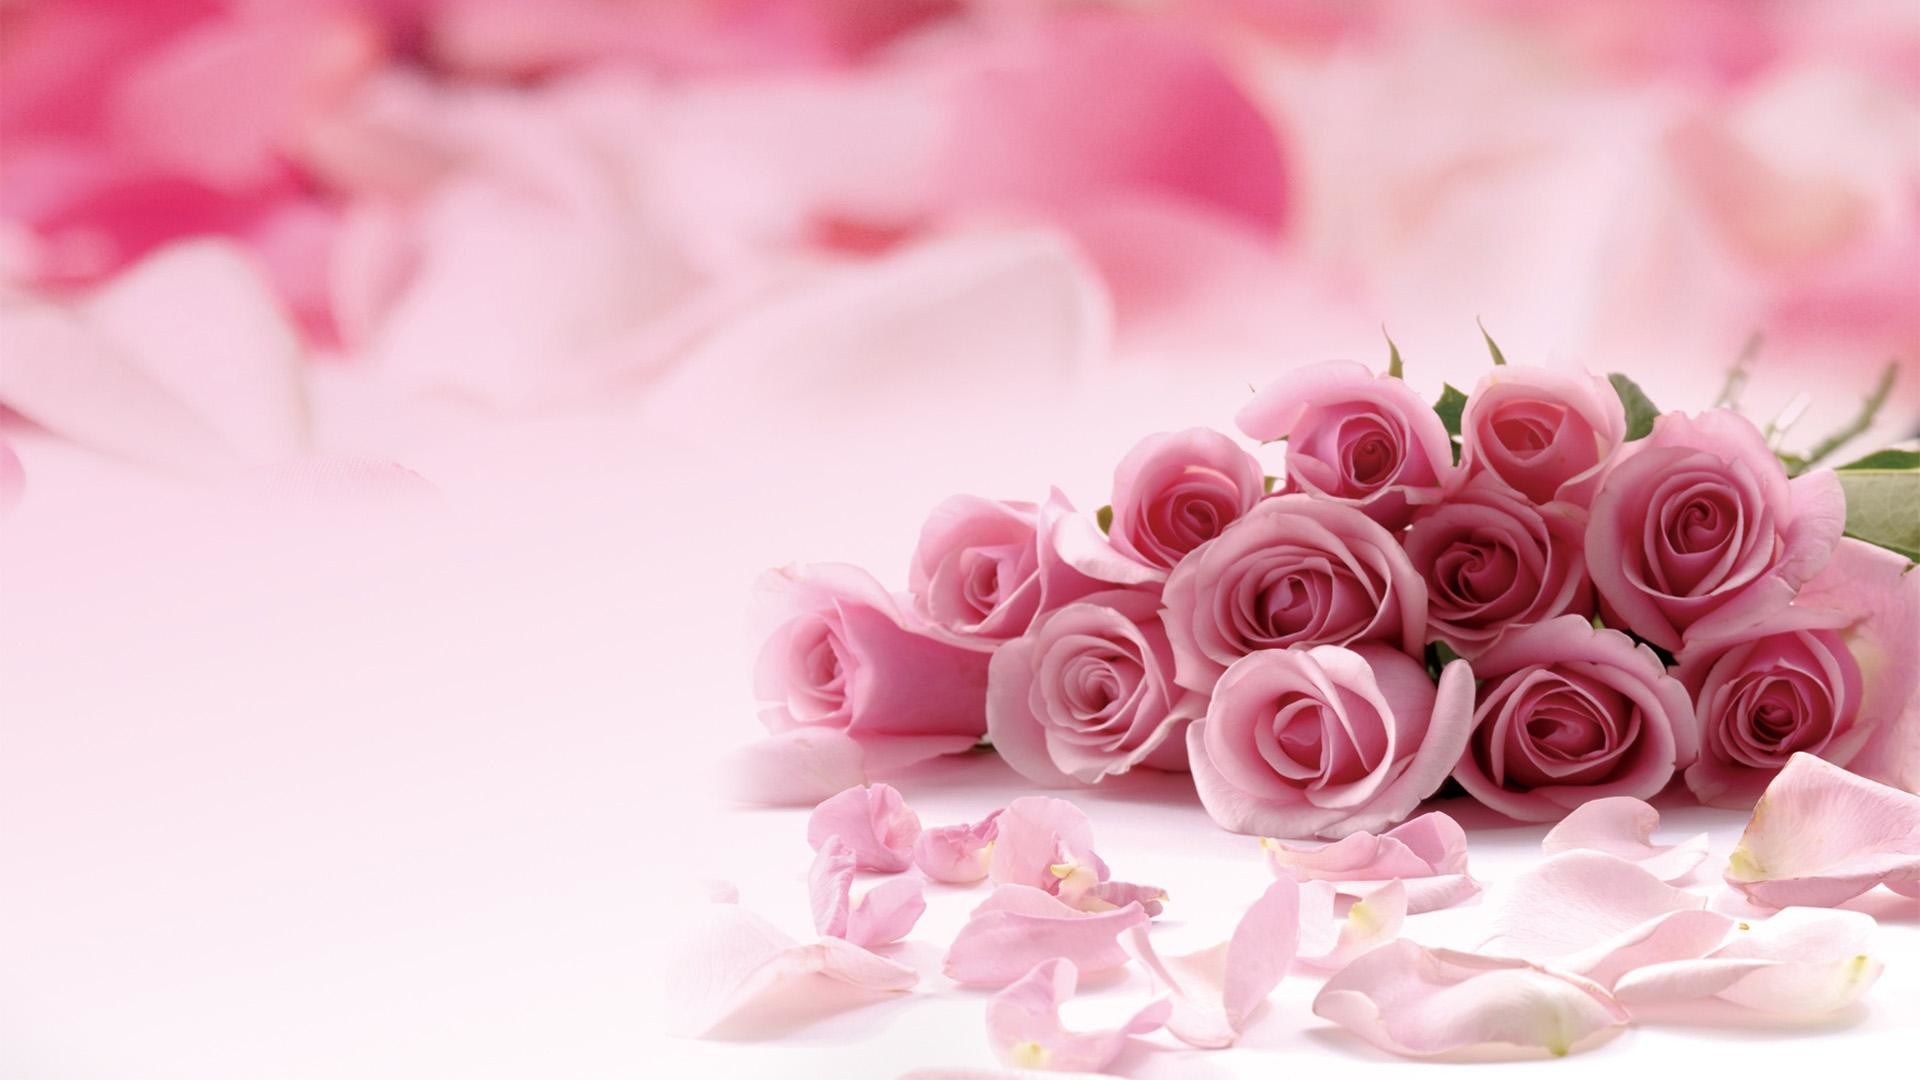 1920x1080 Explore Rose Wallpaper, Pink Candy, and more!